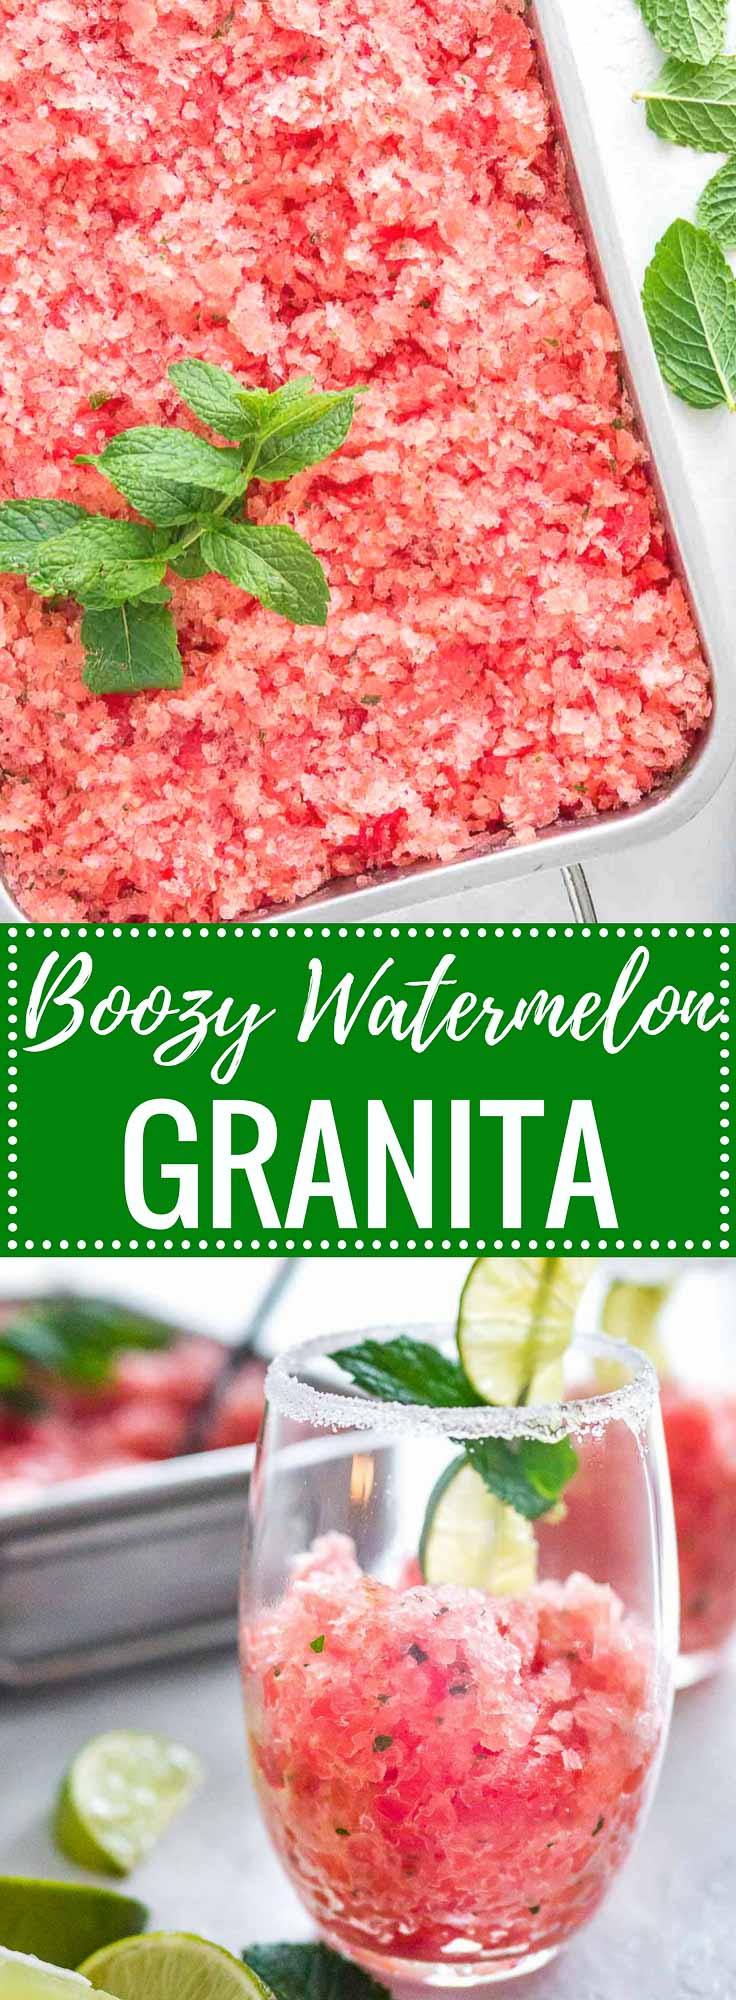 Two images with text: Boozy watermelon granita, top: A stainless steel baking pan of pink watermelon granita garnished with mint. Bottom: A sugar-rimmed glass with granita.